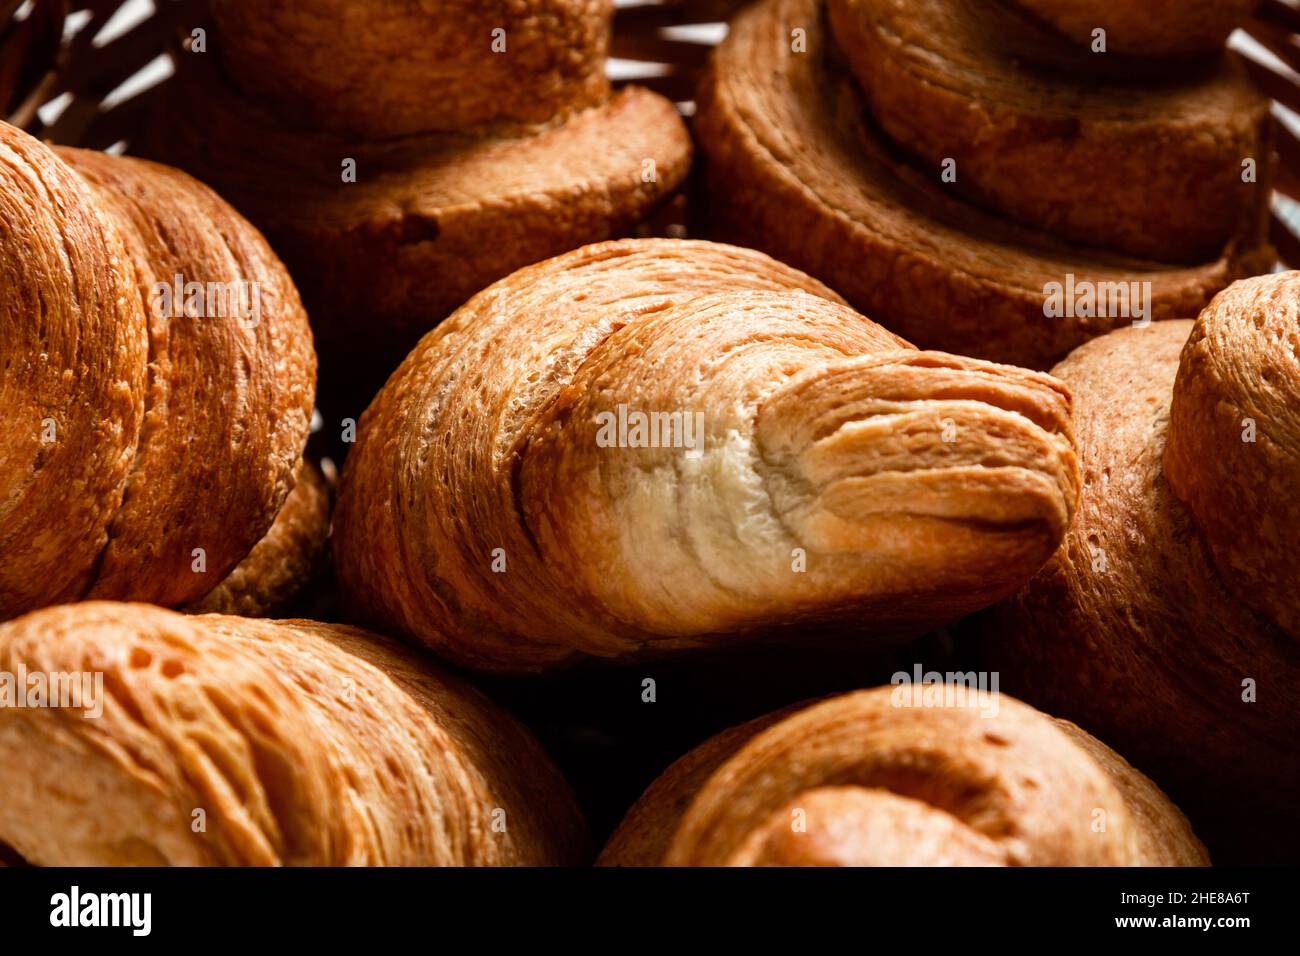 Croissants in a wicker basket on a wooden background. Close-up. Stock Photo